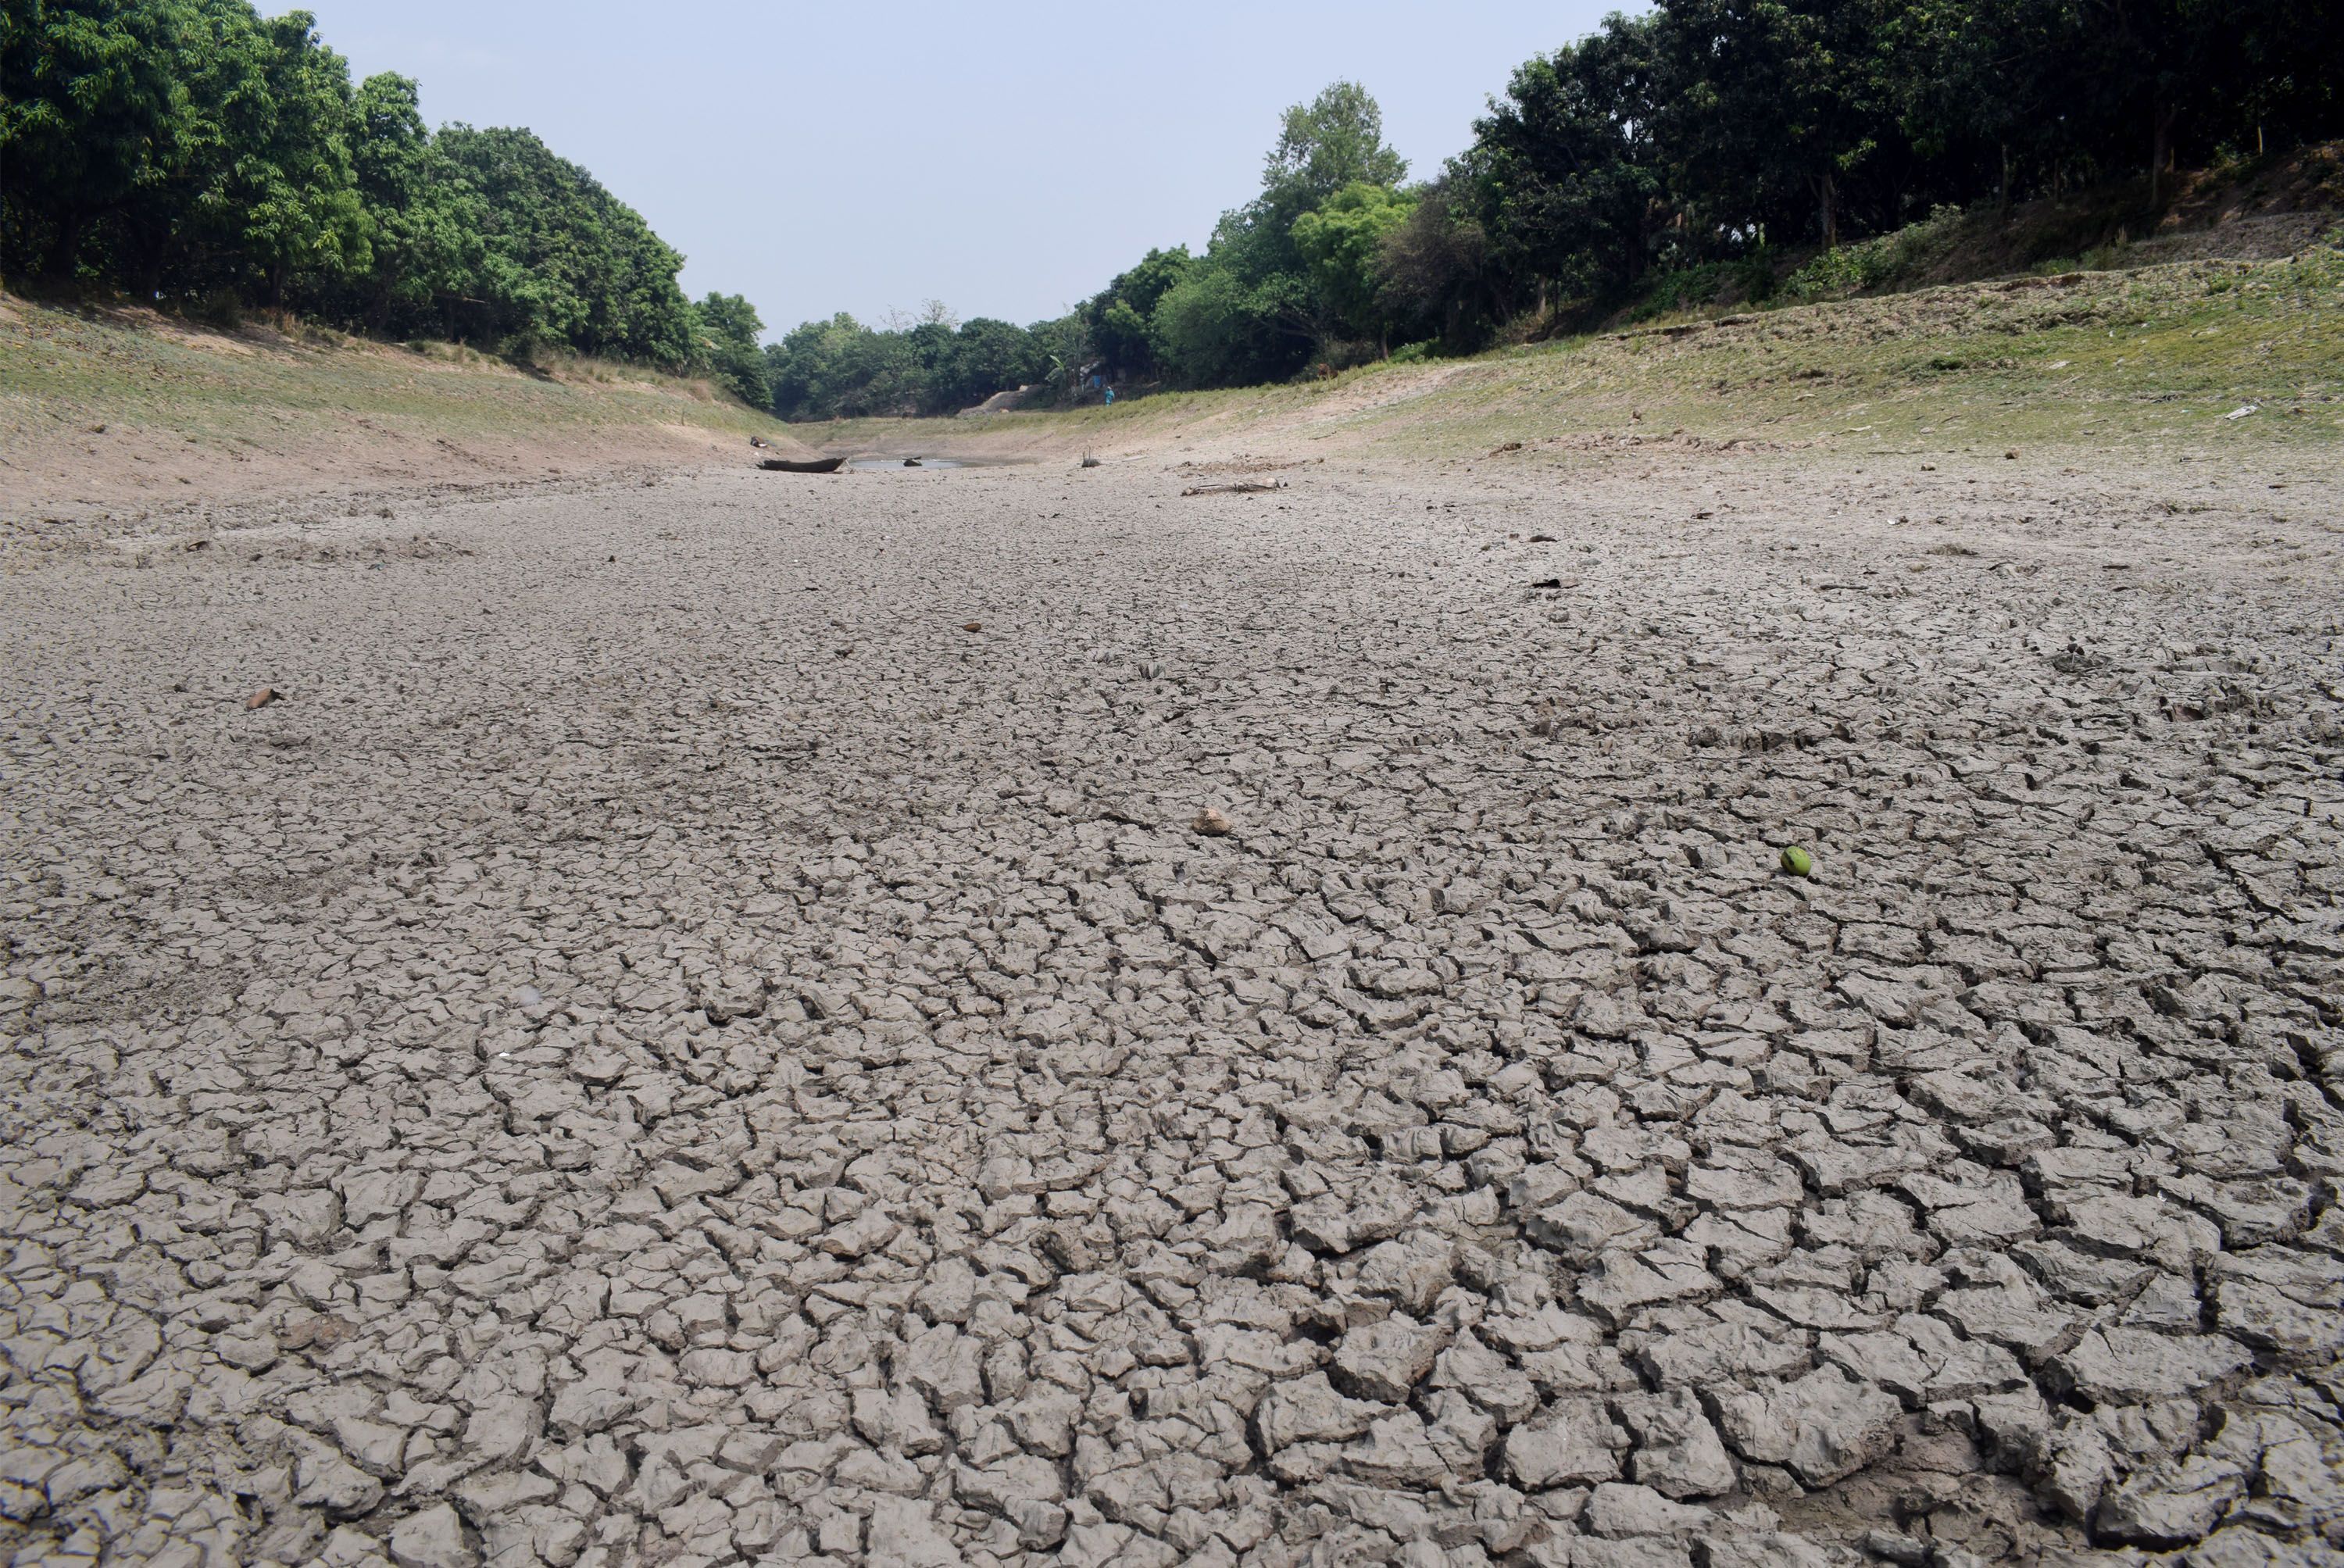 All water reservoirs including rivers and canals, canals and pools have dried up. Nature is waiting for the drops of rain.